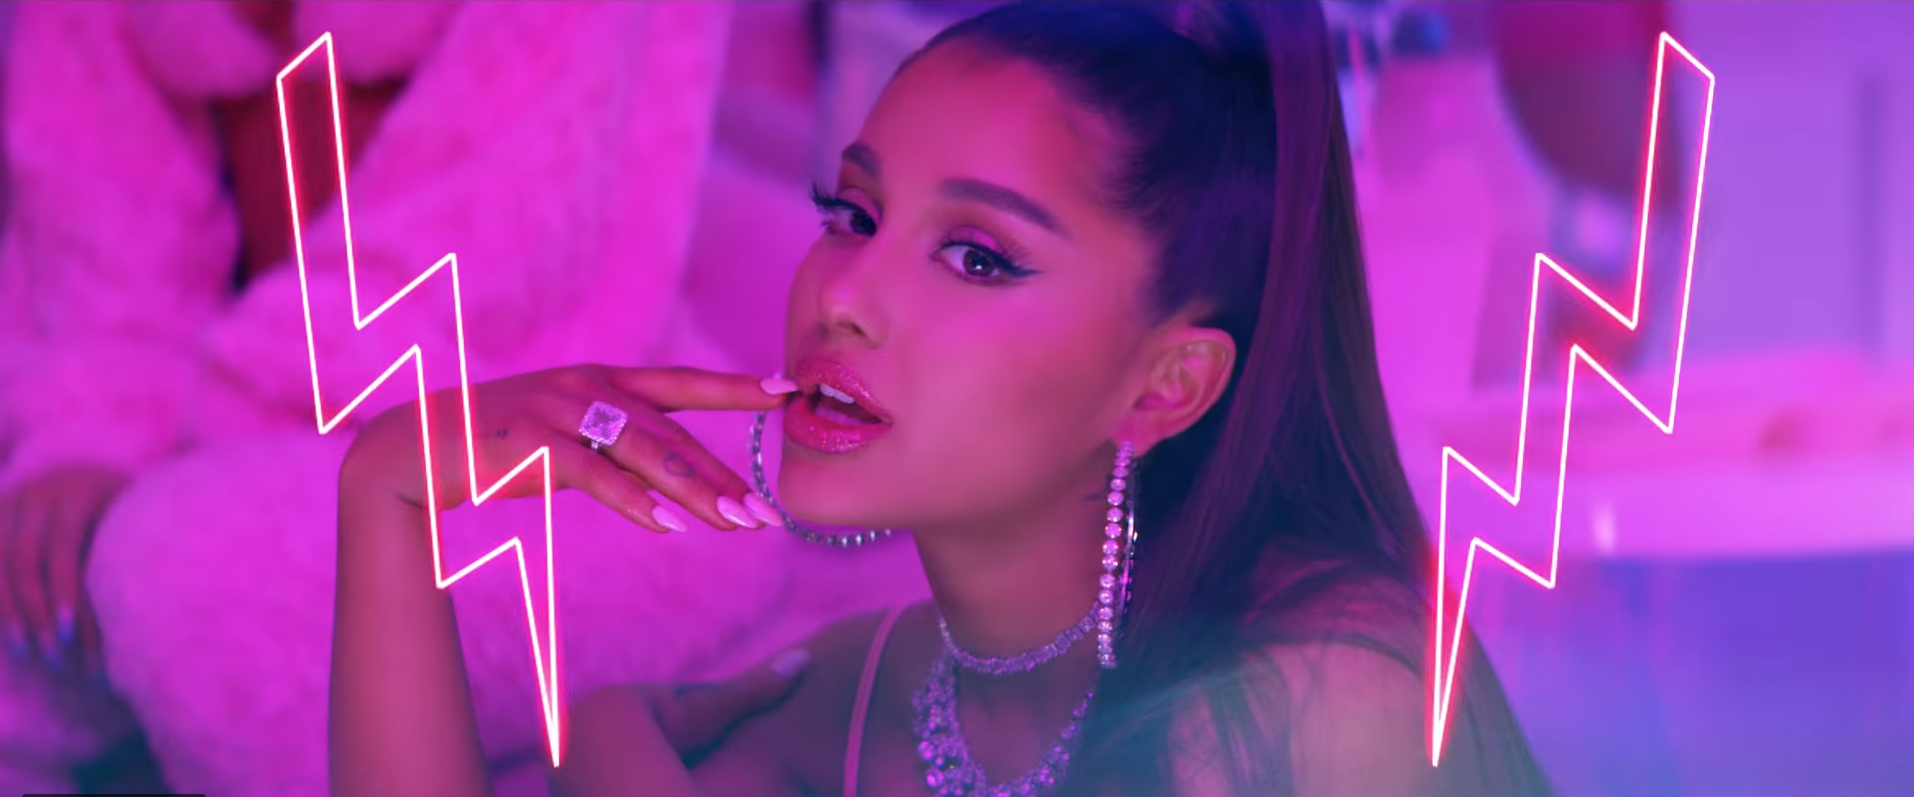 Ariana Grande - 7 rings (Lyrics) - (You like my hair? Gee, thanks, just  bought it) - YouTube